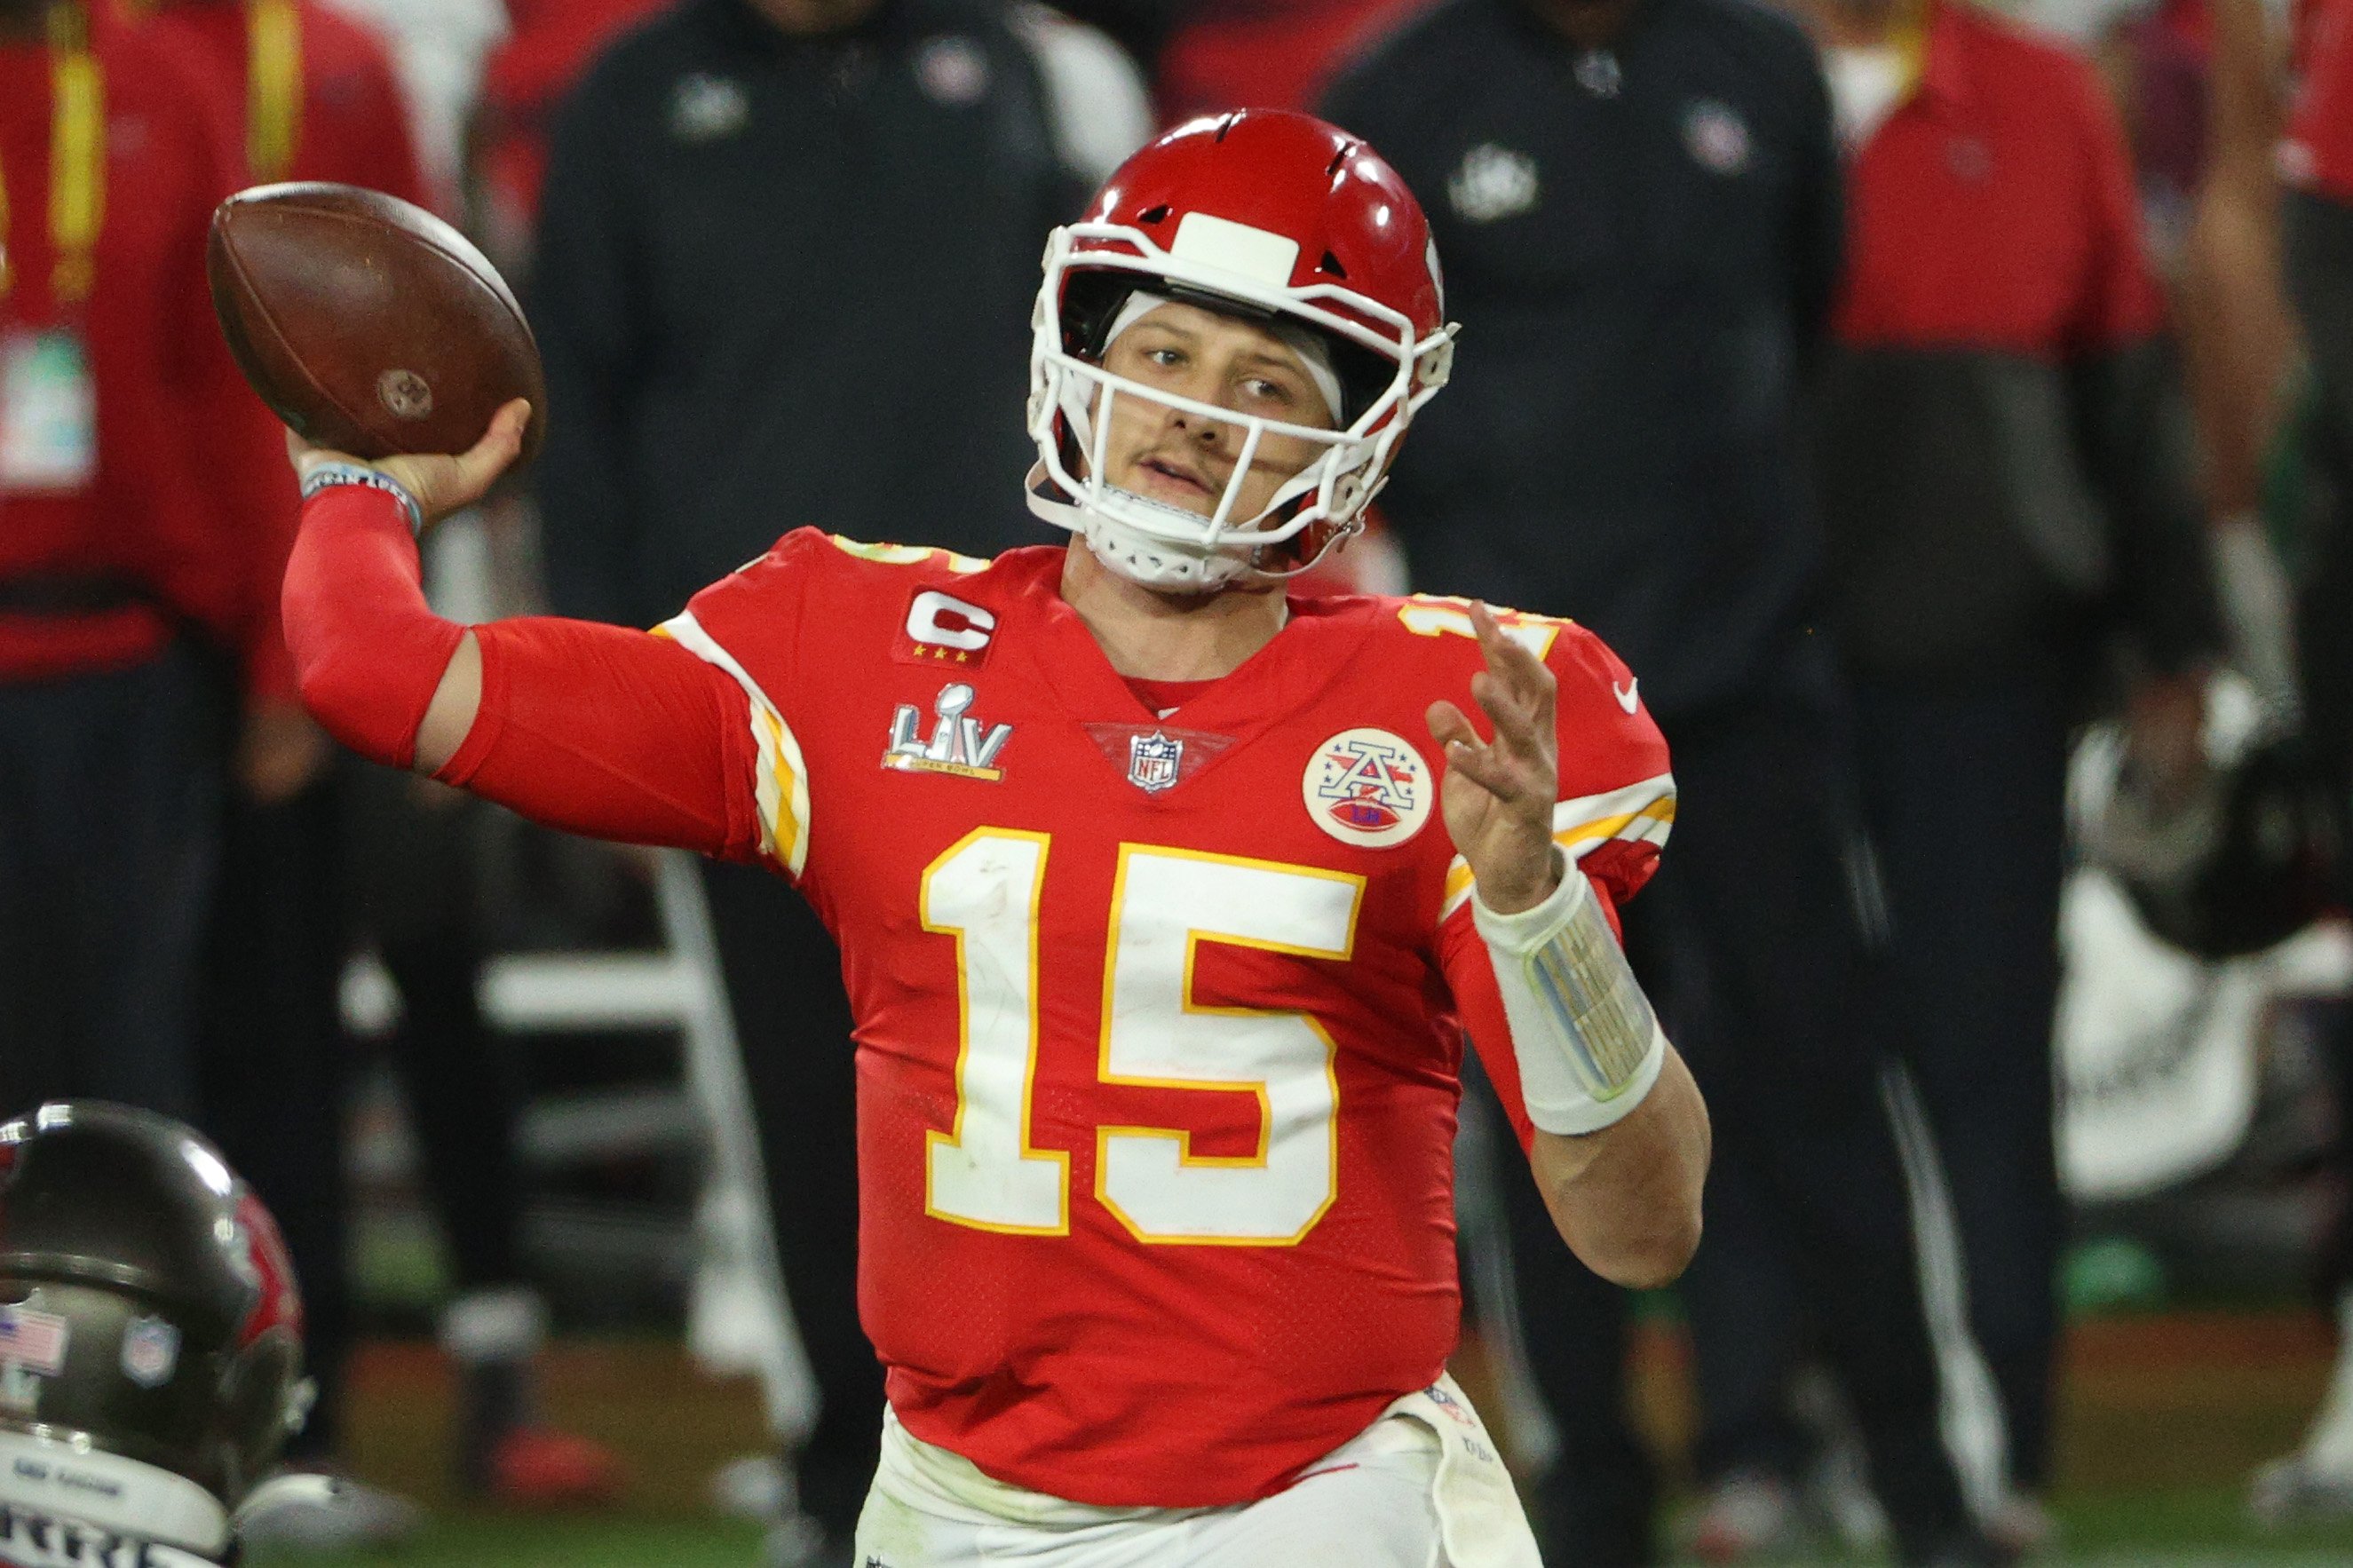 Patrick Mahomes battling it out on the field, in the Super Bowl LV final against the Tampa Buccaneers, February, 2021. | Photo: Getty Images.